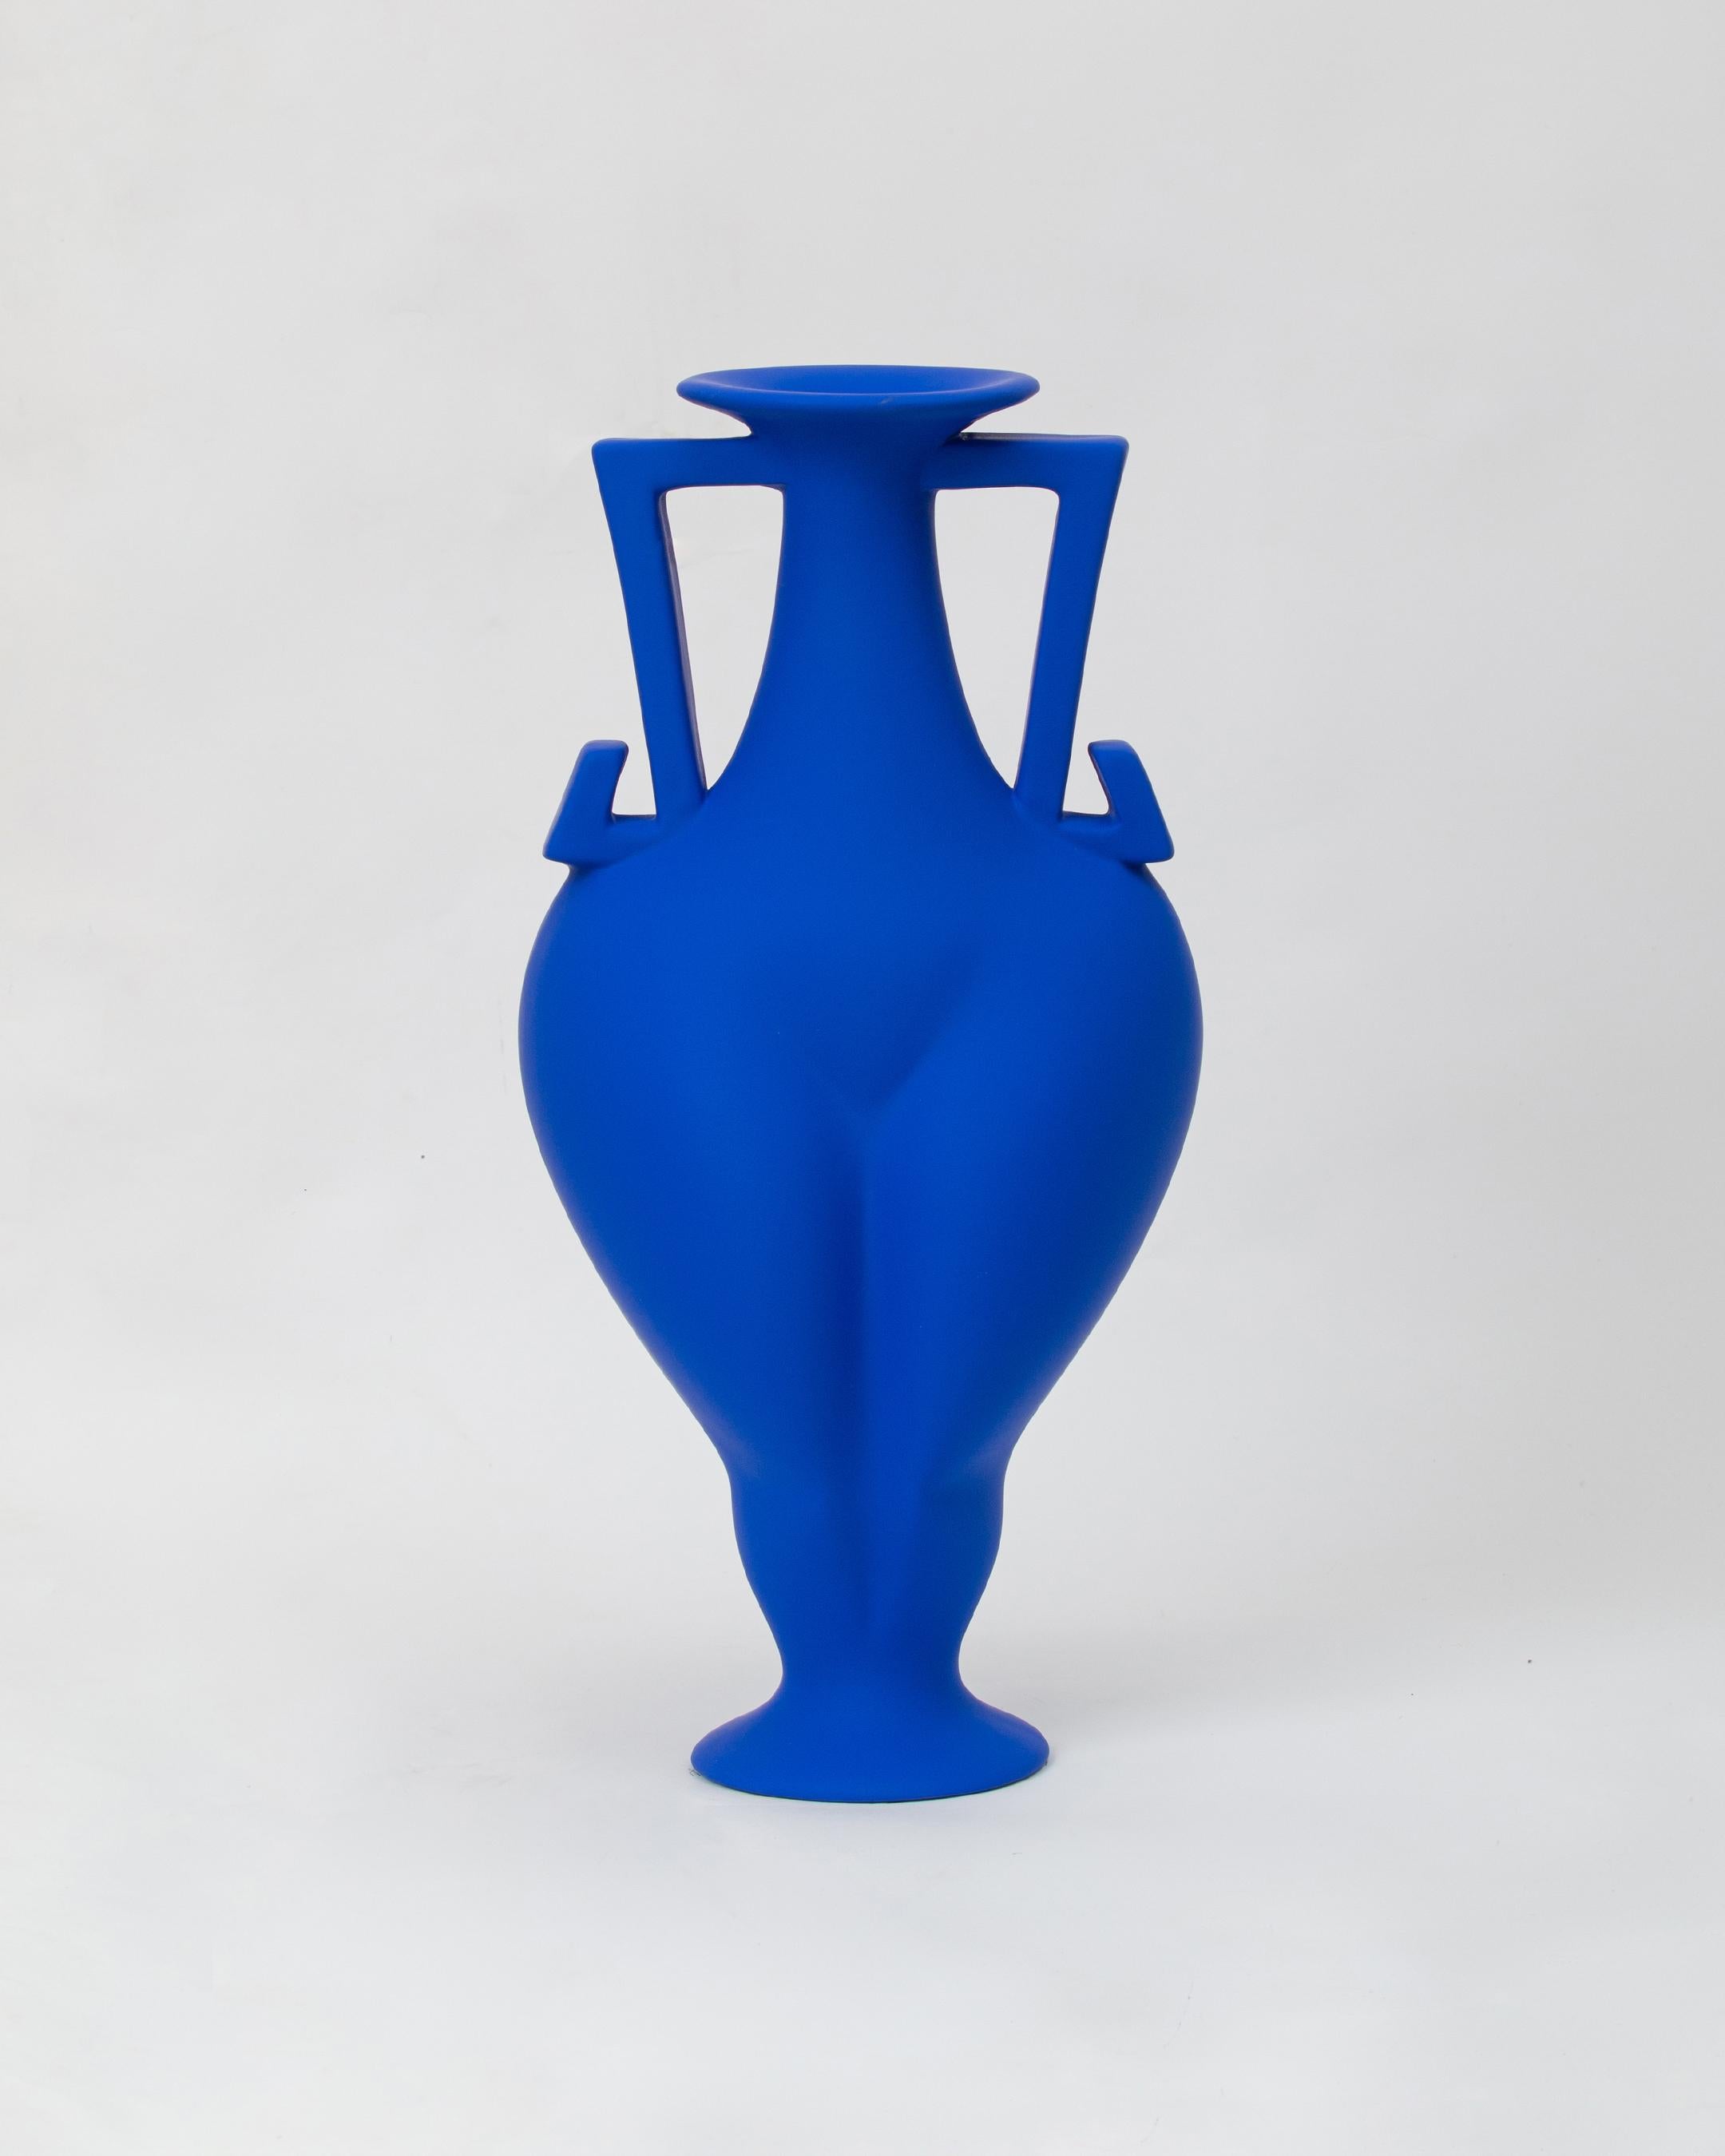 A vase with feminine features, a combination of beauty, perfection and harmony of the statuesque body represented in Greek art, and the graceful silhouette of the contemporary female body. B-phora ironically shows what has been hidden for centuries